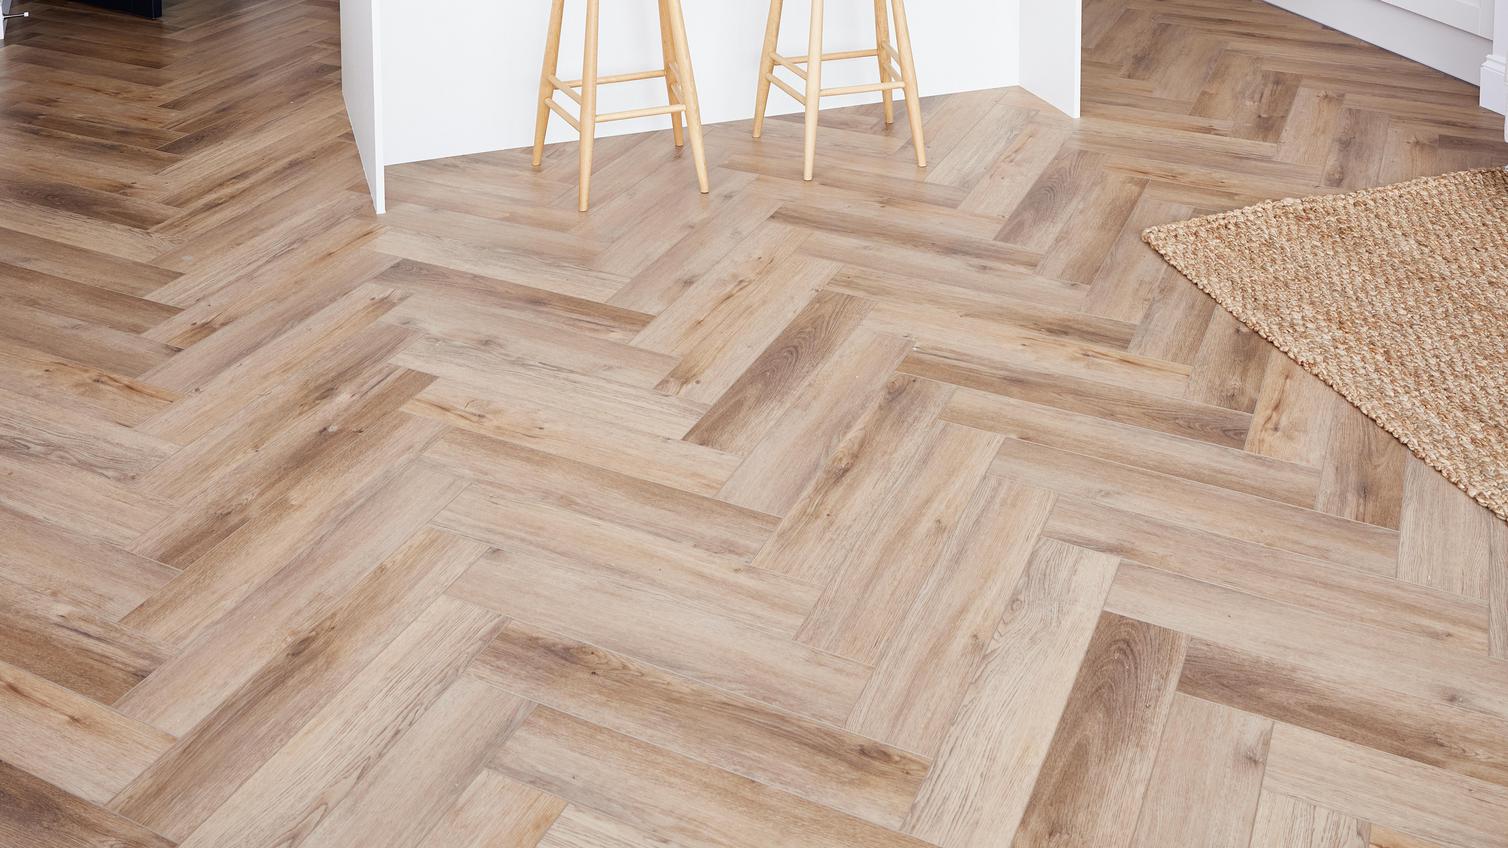 Wood-effect laminate flooring from Oake & Gray, a Howdens exclusive brand